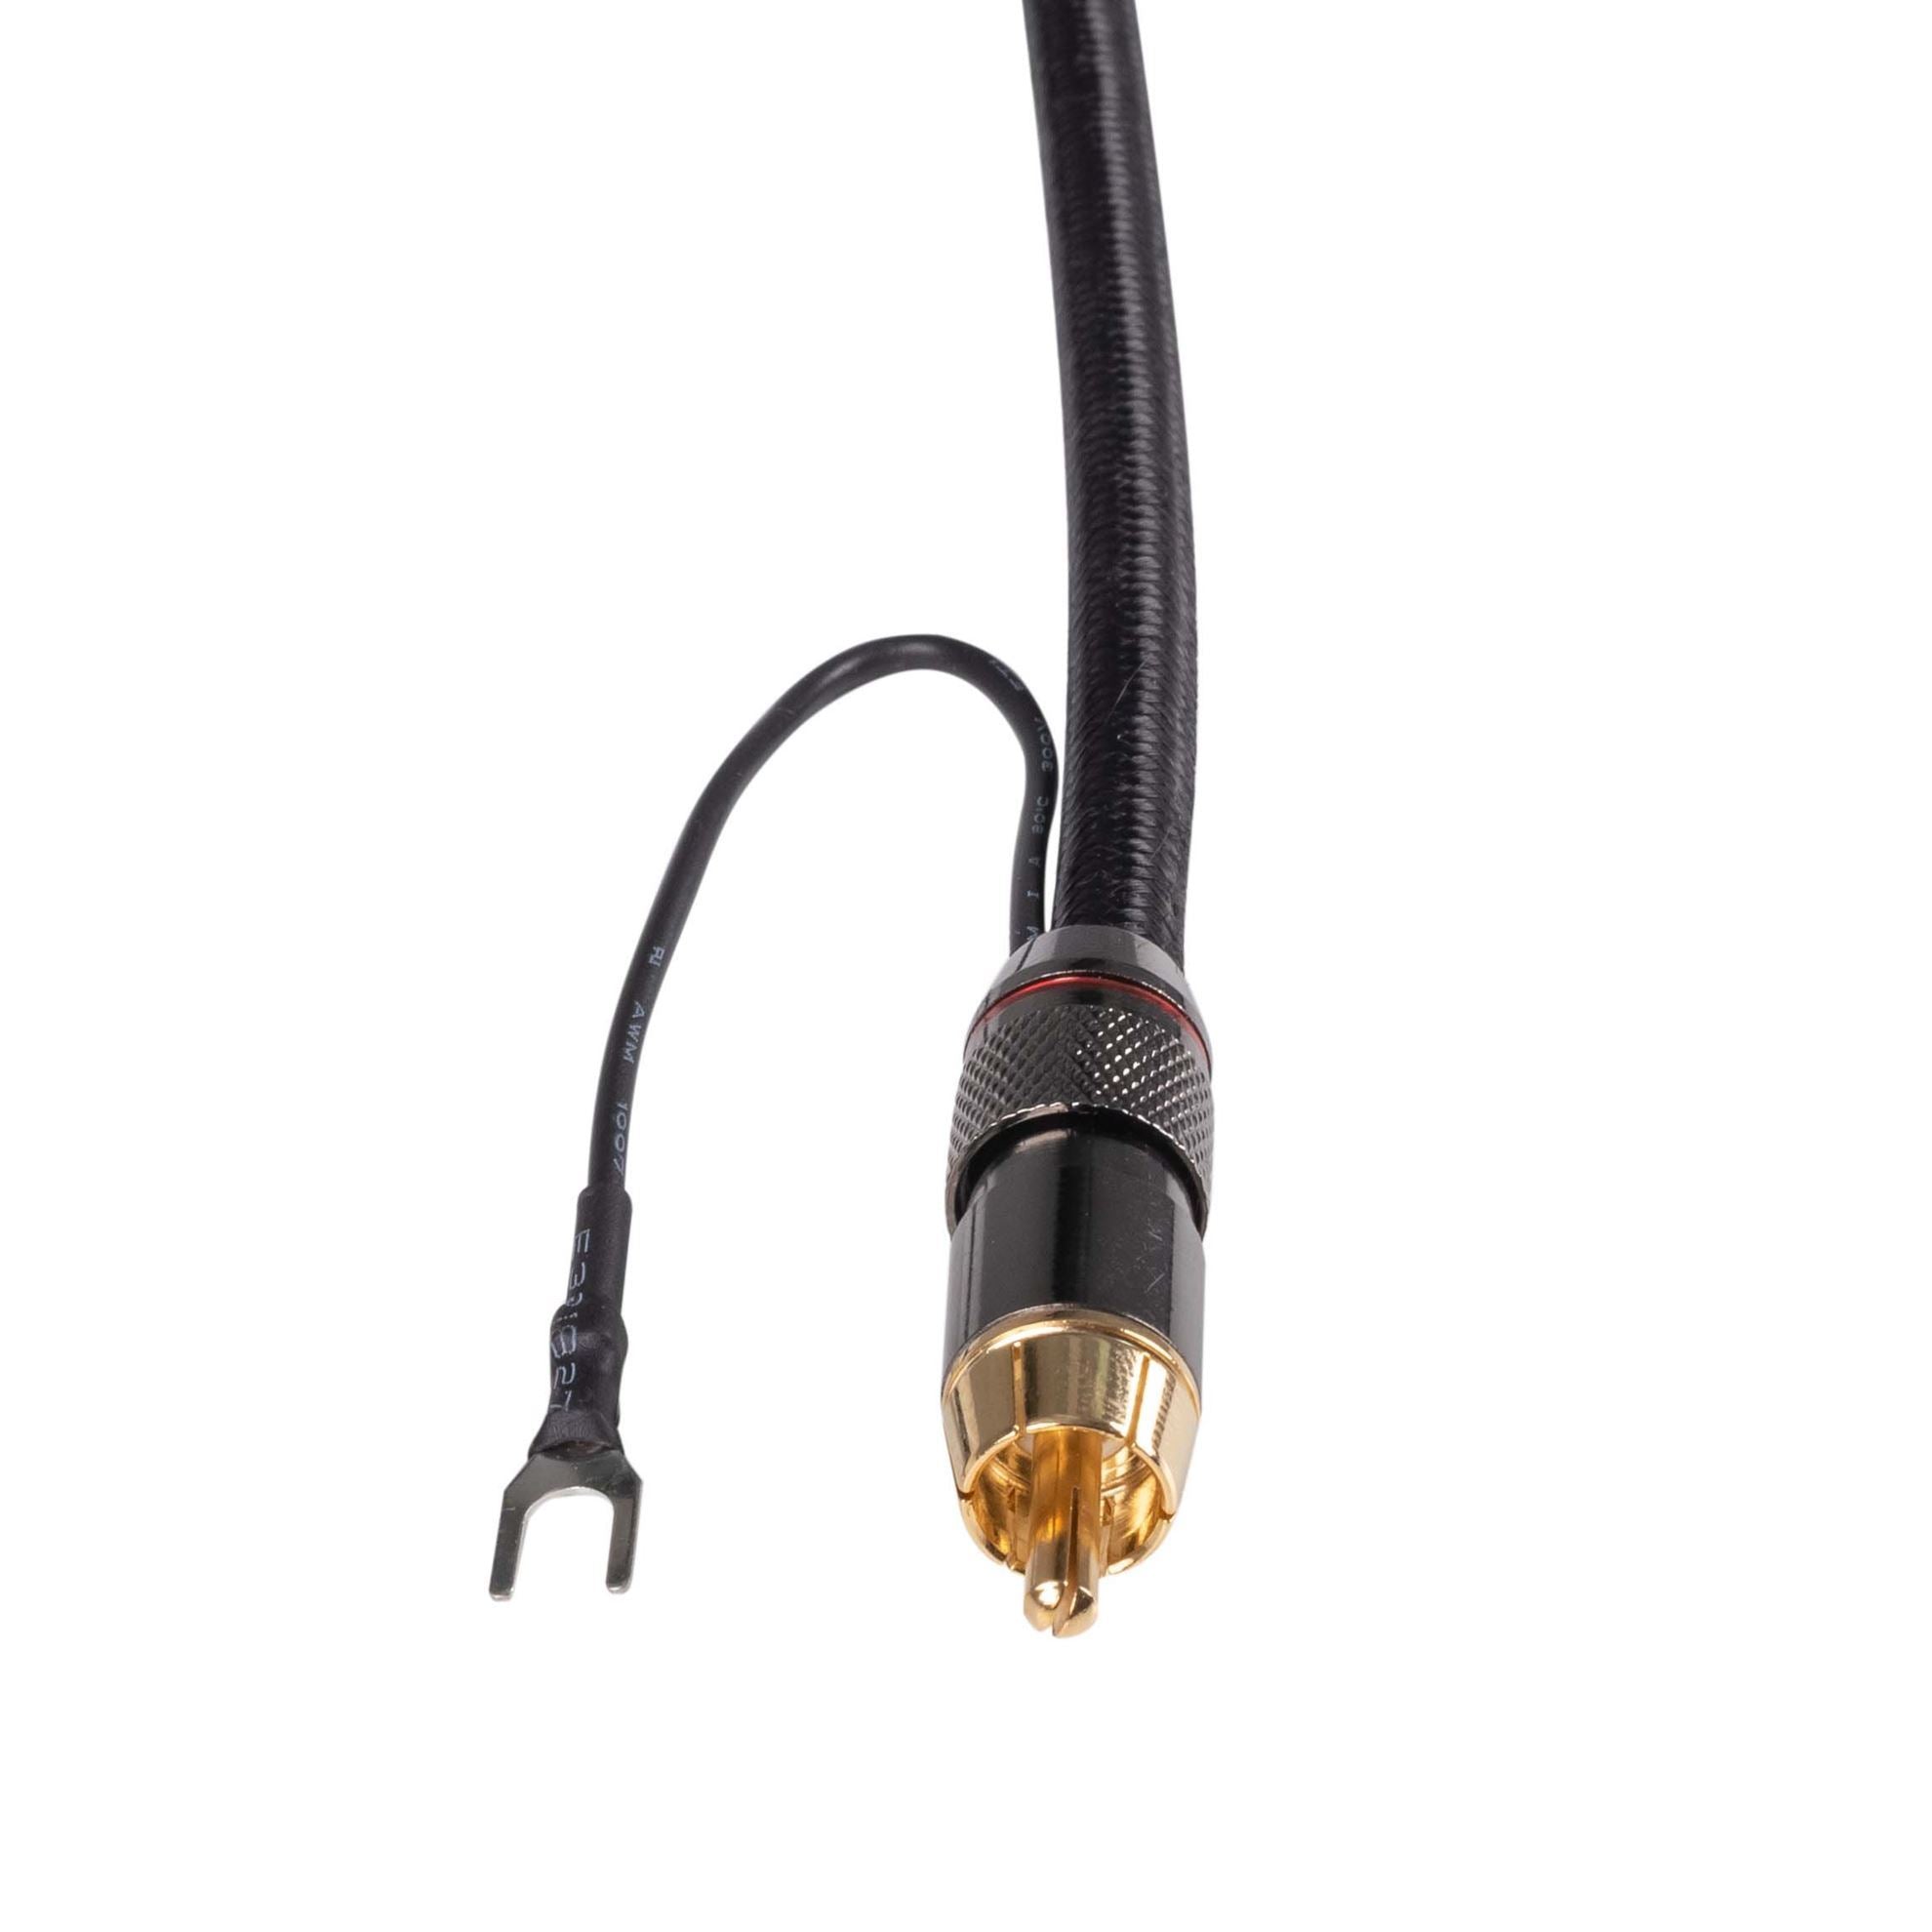 DYNAMIX_6m_Coaxial_Subwoofer_Cable_RCA_Male_to_Male_with_Grounding_Spade_Connectors 512